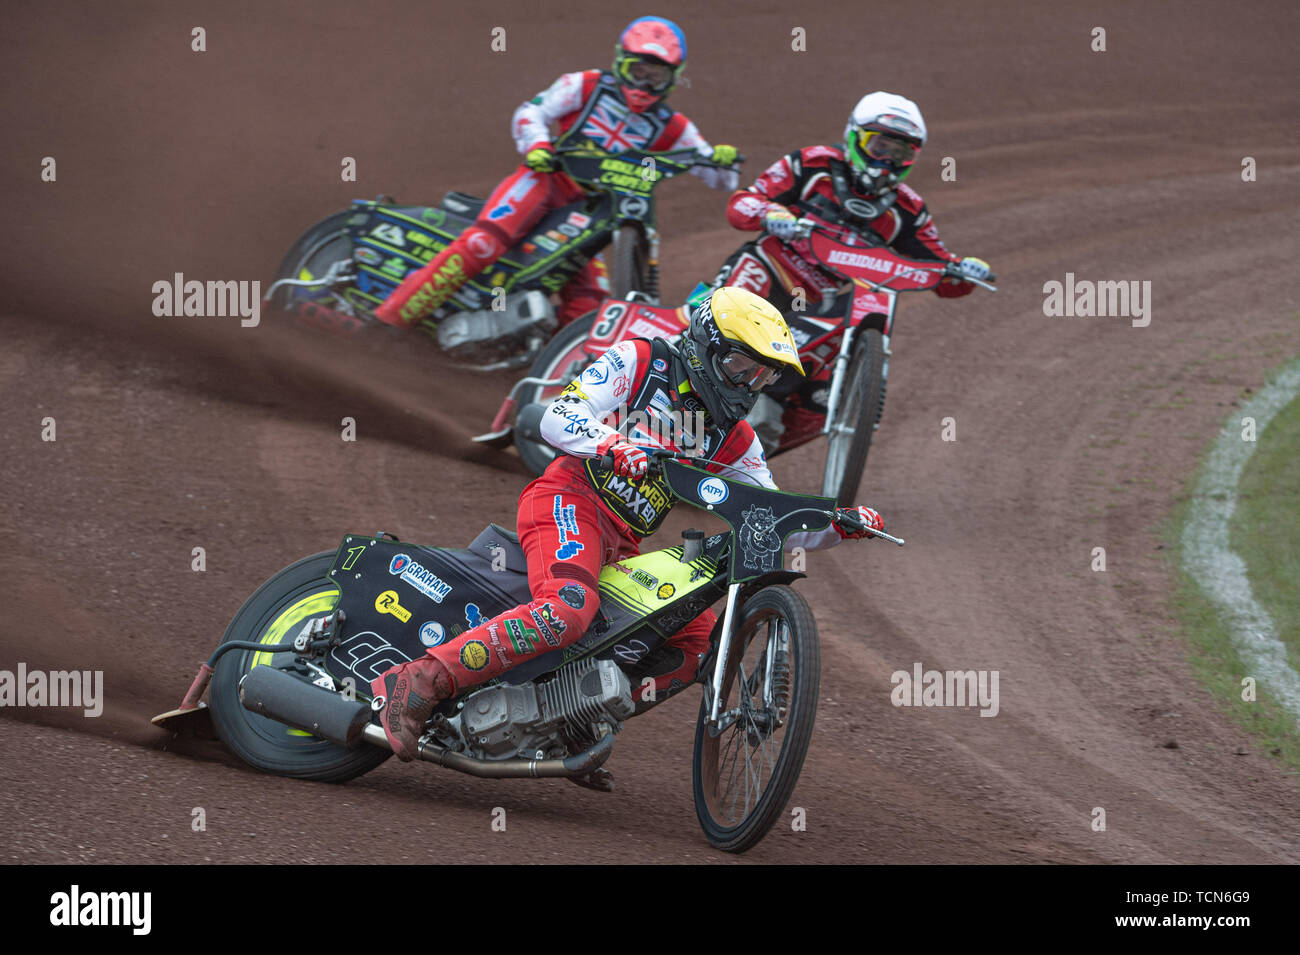 Glasgow, Scotland, UK. 08th June, 2019.  Craig Cook (Yellow) leads Hans Andersen (White) and Kyle Bickley (Blue) during the FIM Speedway Grand Prix World Championship - Qualifying Round 1 at the Peugeot Ashfield Stadium, Glasgow on Saturday 8th June 2019. (Credit: Ian Charles | MI News) Credit: MI News & Sport /Alamy Live News Stock Photo